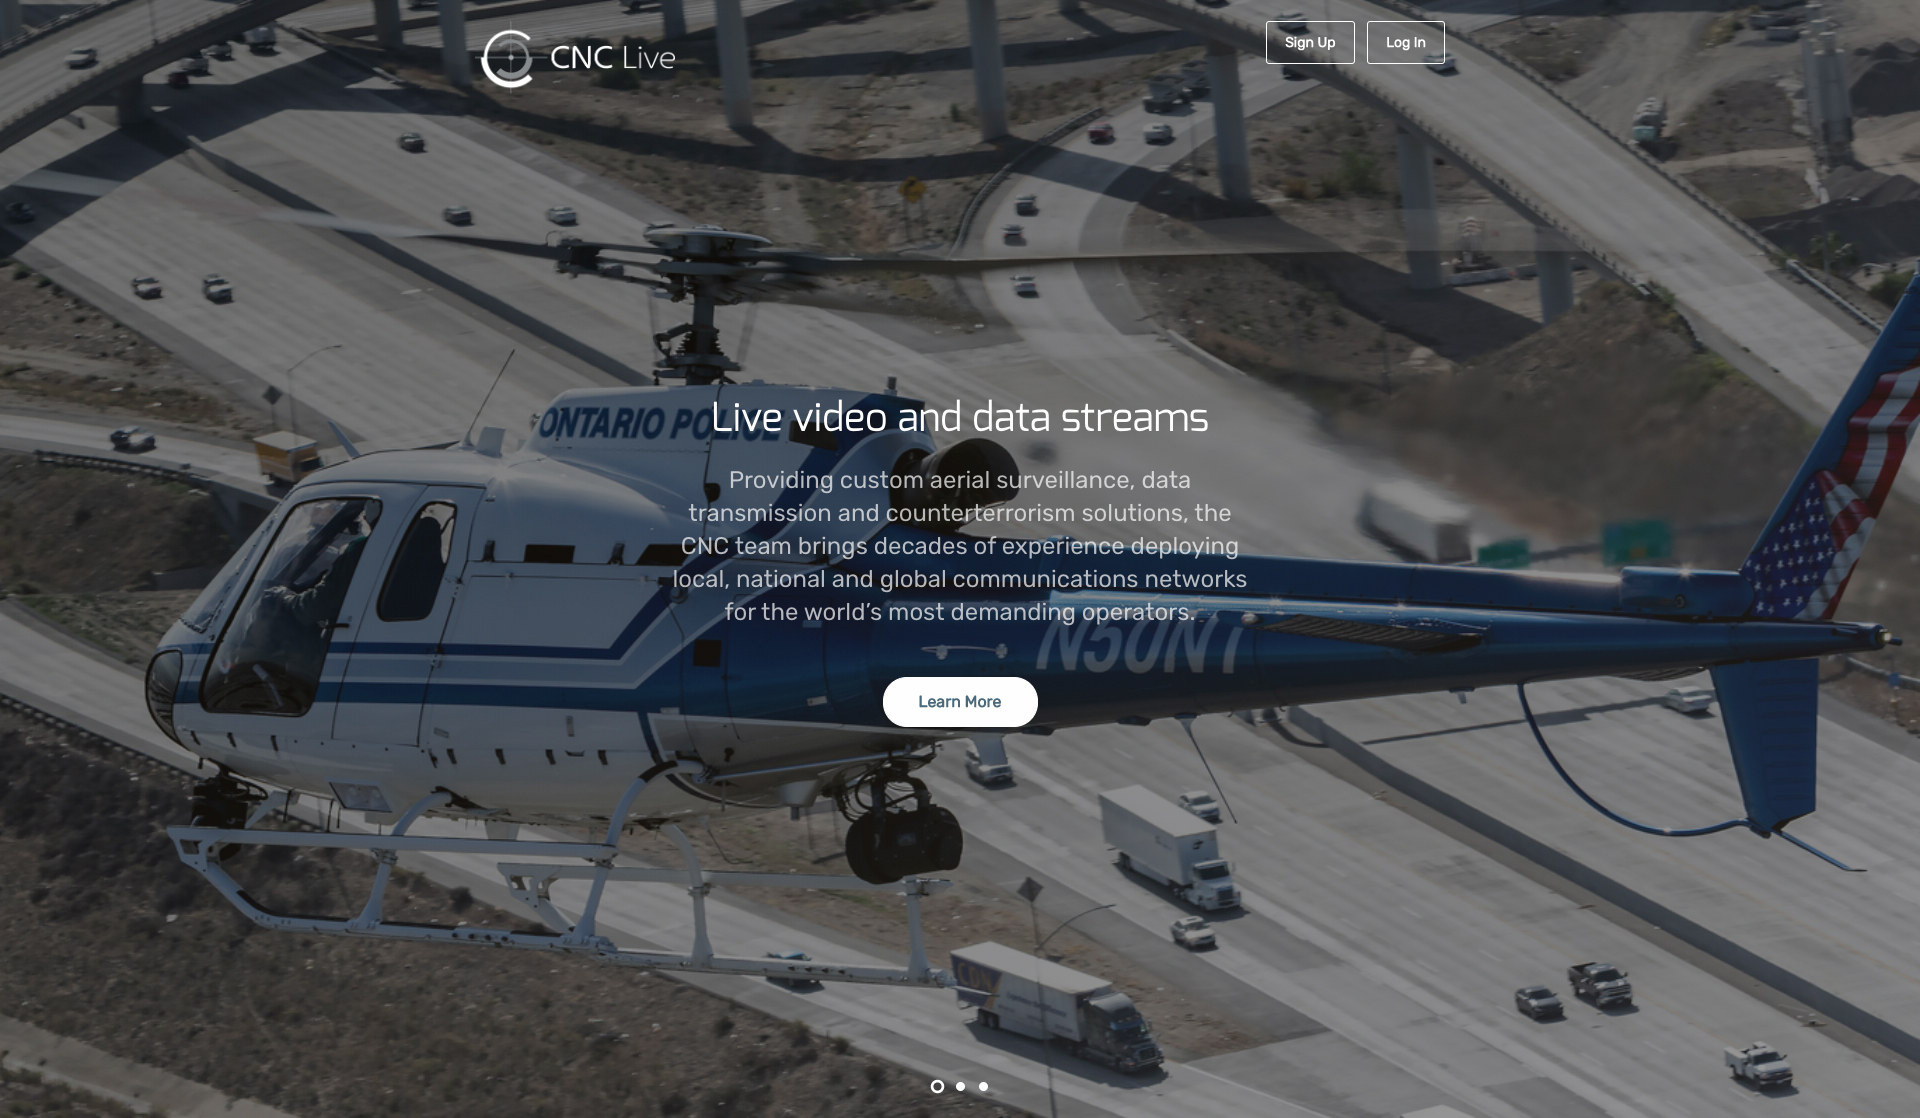 CNC.LIVE enables commanders and staff to securely access live video from their department’s helicopters, fixed-wing aircraft and UAVs from any Internet-connected device. CNC Image